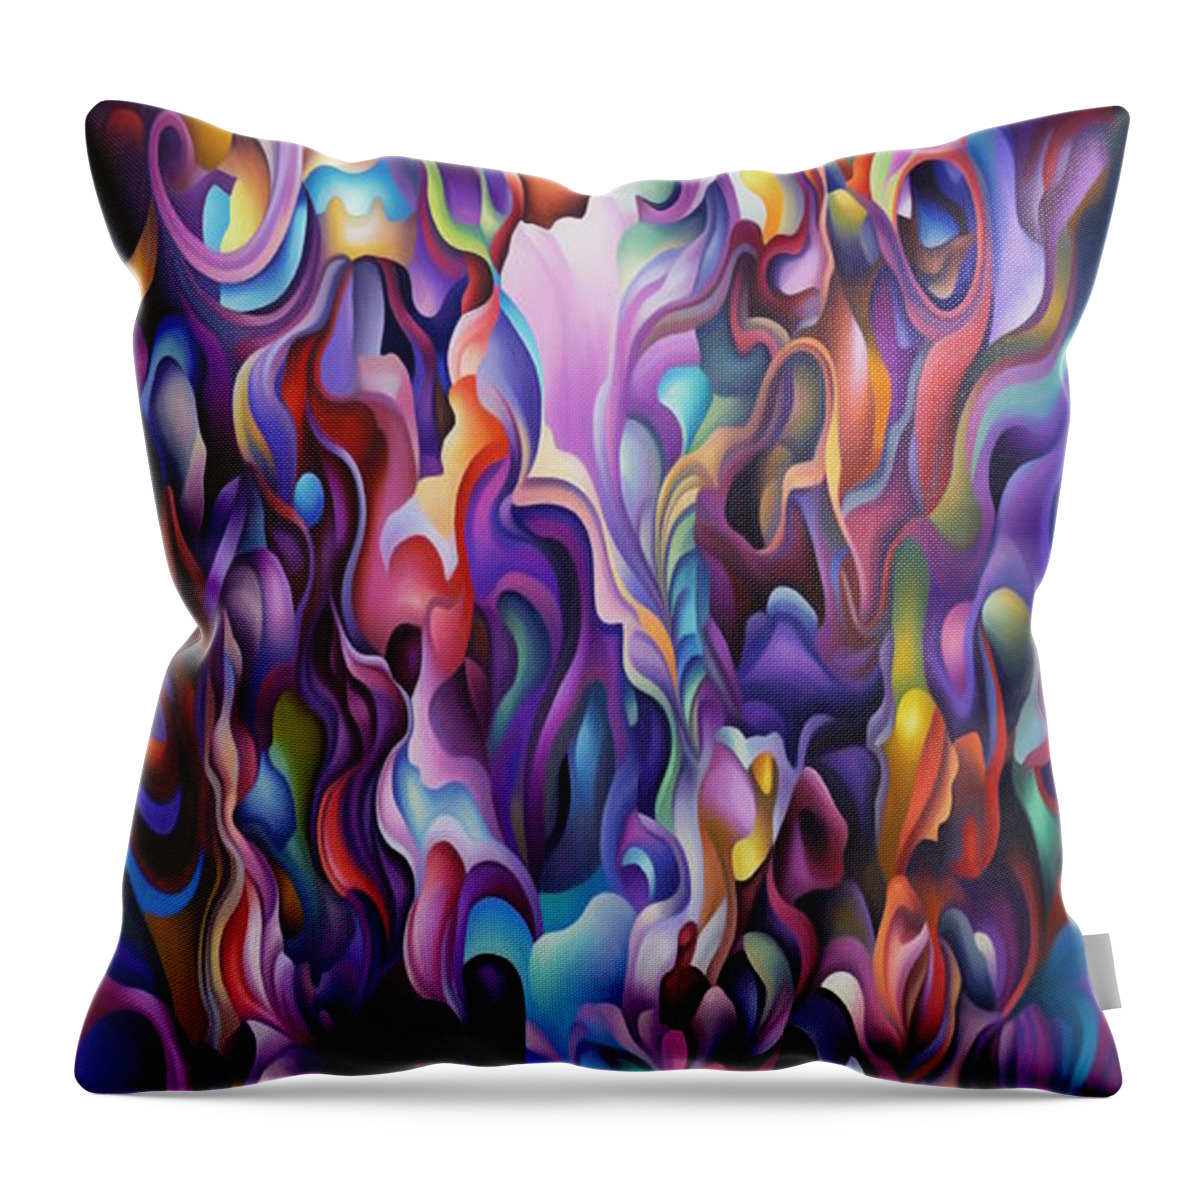  Throw Pillow featuring the digital art Case No 14 by Mark Slauter